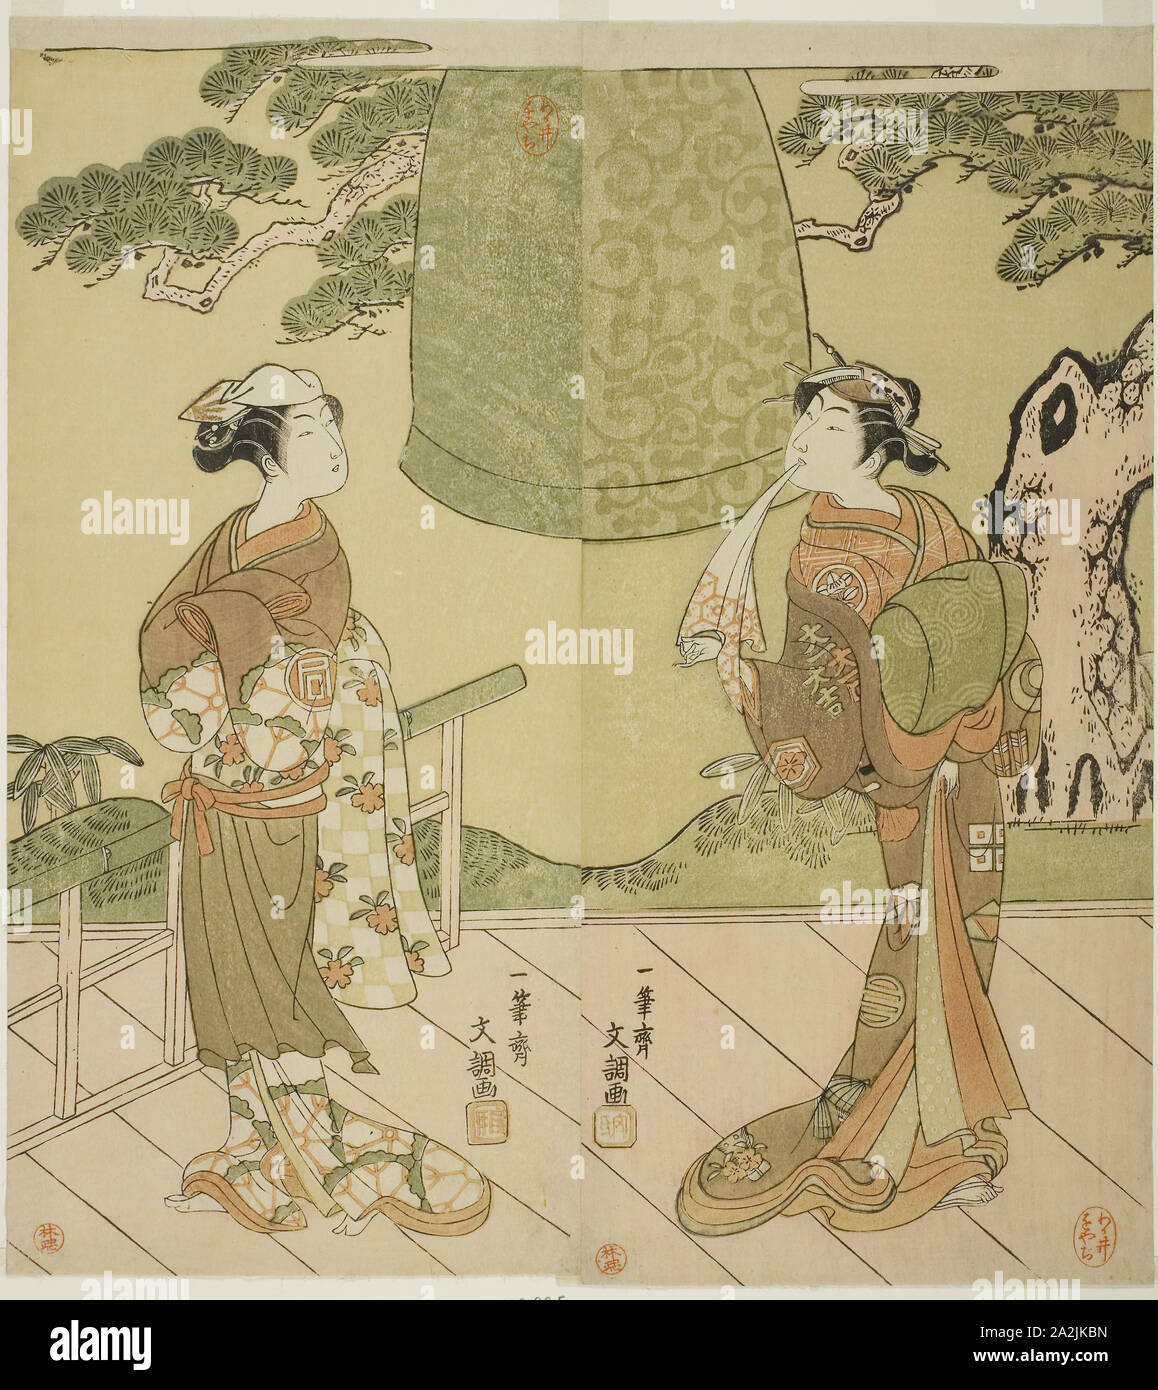 The Actors Ichimura Uzaemon IX as Shume no Hangan Morihisa (right), and Sanogawa Ichimatsu II as Chujo (left), in the Play Edo no Hana Wakayagi Soga, Performed at the Ichimura Theater in the Second Month, 1769, c. 1769, Ippitsusai Buncho, Japanese, active c. 1755-90, Japan, Color woodblock print, hosoban, center and left sheets of triptych, 31.5 x 14.3 cm (12 3/8 x 5 5/8 in.) (right), 31.3 x 14.2 cm (12 5/16 x 5 9/16 in.) (left Stock Photo